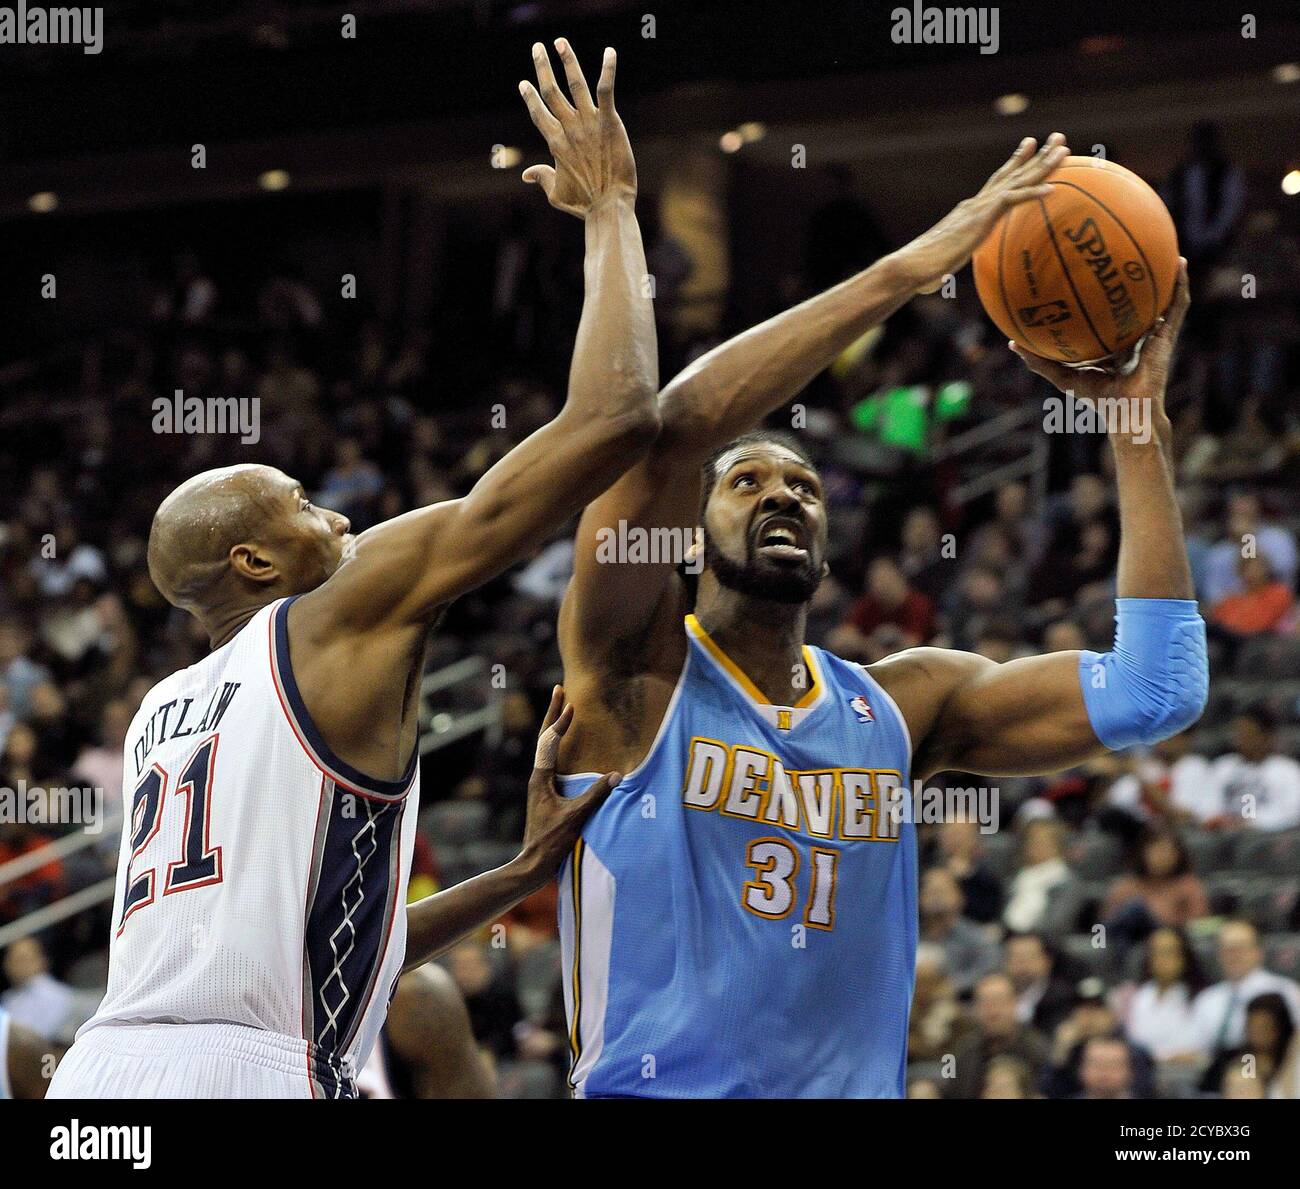 Denver Nuggets center Nene Hilario grabs a rebound over New Jersey Nets  forward Travis Outlaw (L) in the first quarter of their NBA basketball game  in Newark, New Jersey, January 31, 2011.